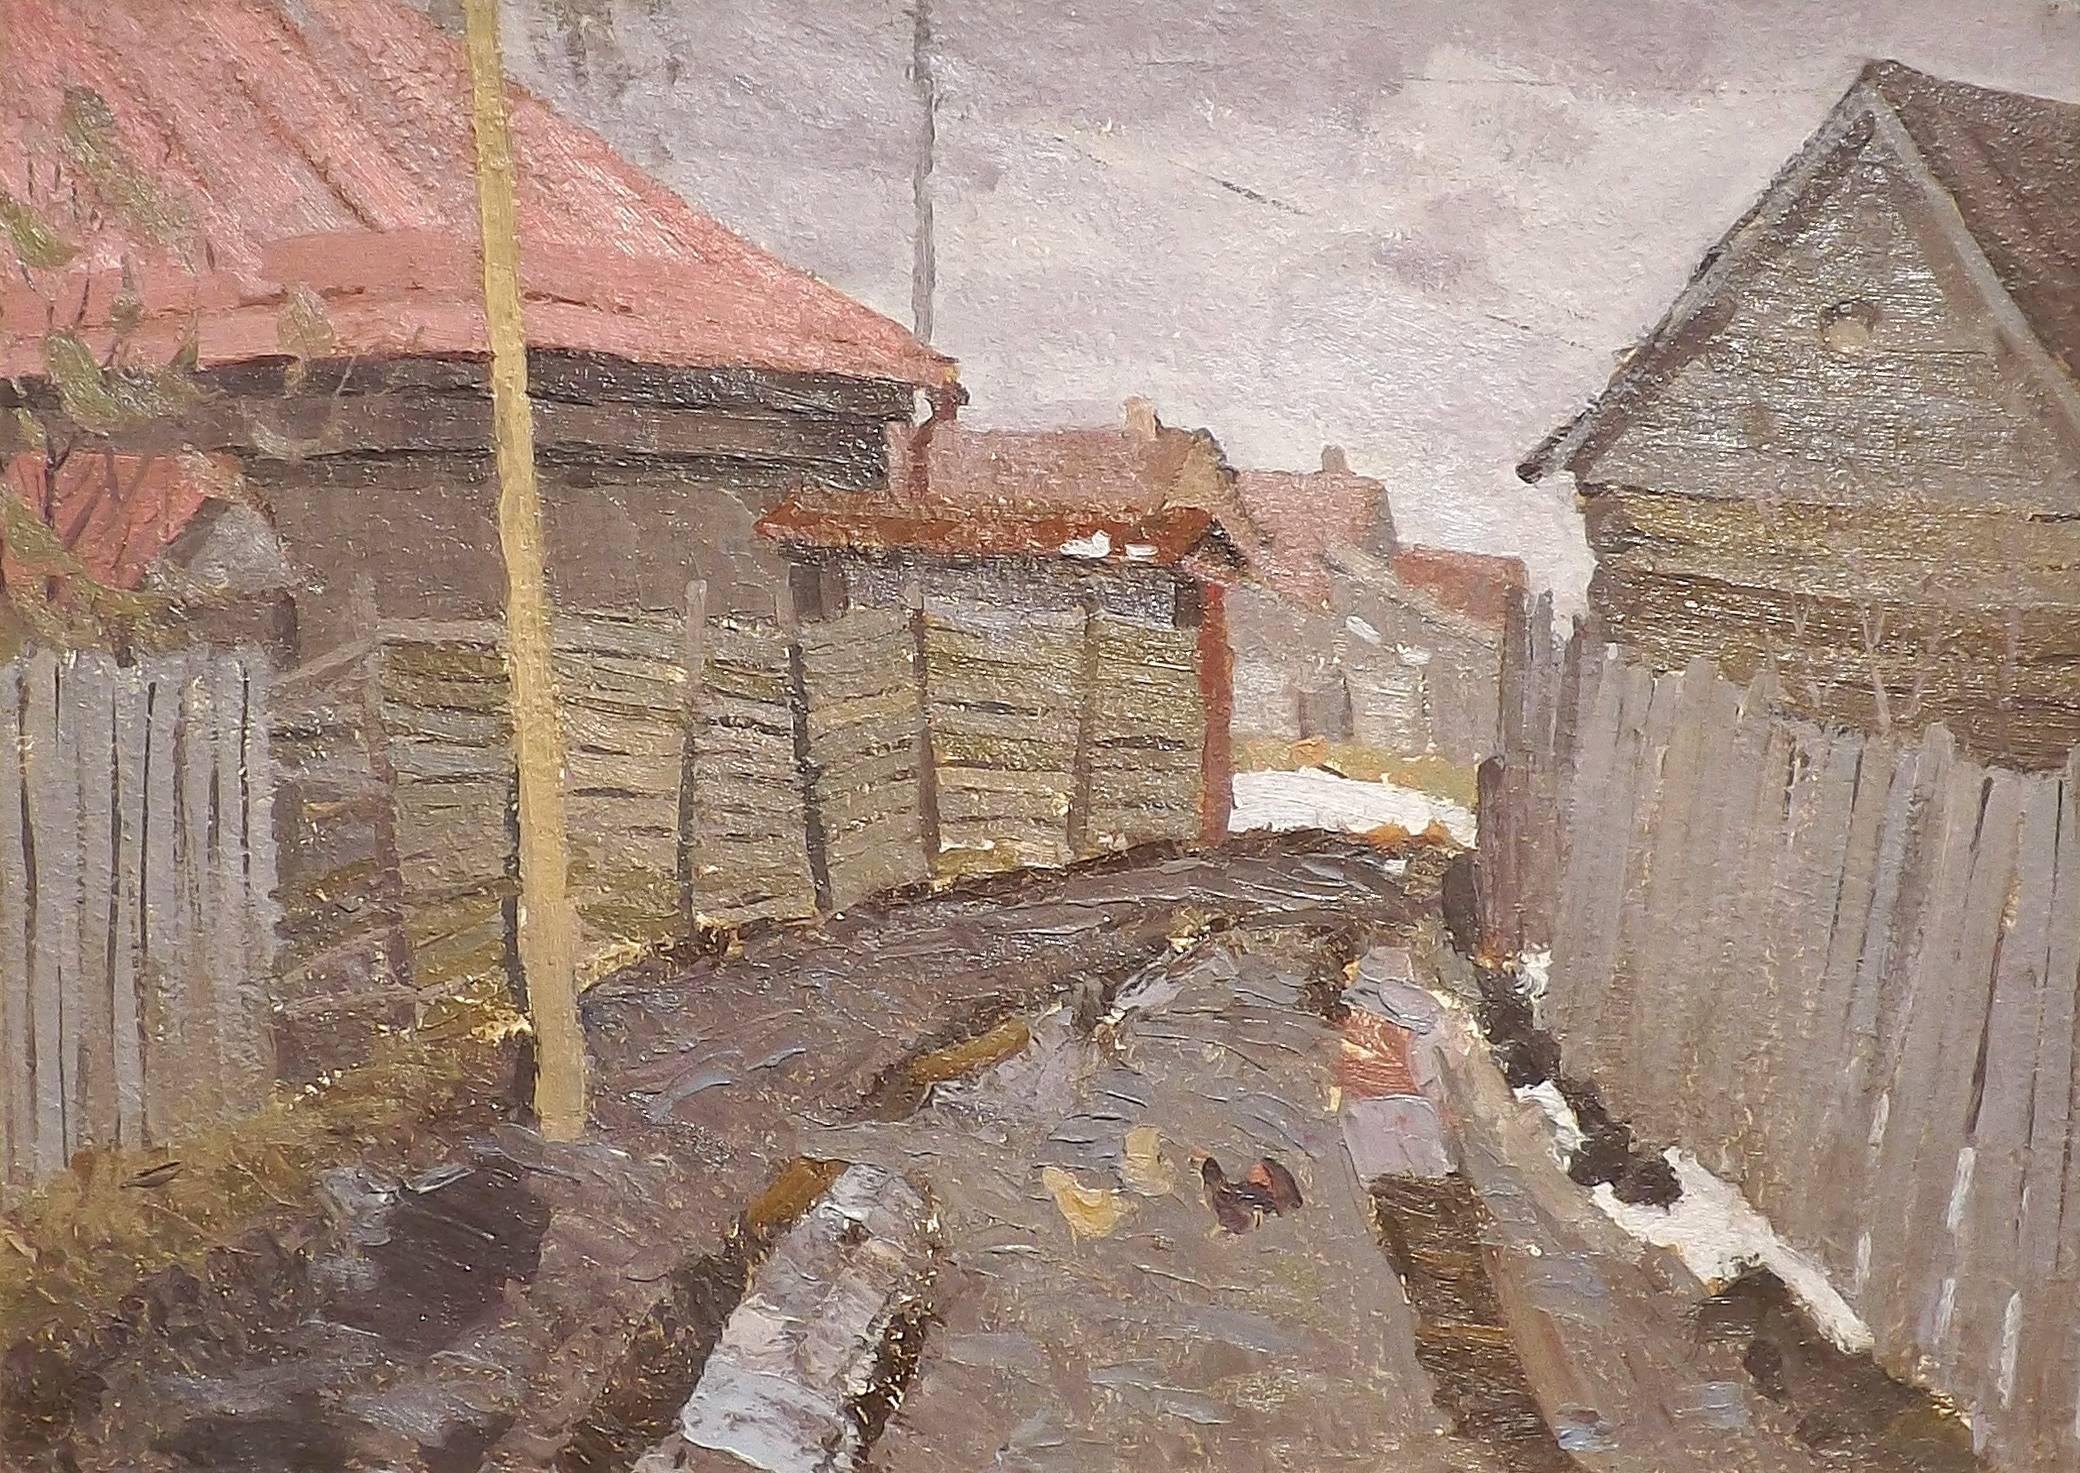 Chickens peck at the ground on a muddy dirt road in this moody tonal painting by Nikolai Modorov (1928-1989). Dark grey clouds float over the reddish roofs while small patches of snow remain in corners where the spring sun has yet to